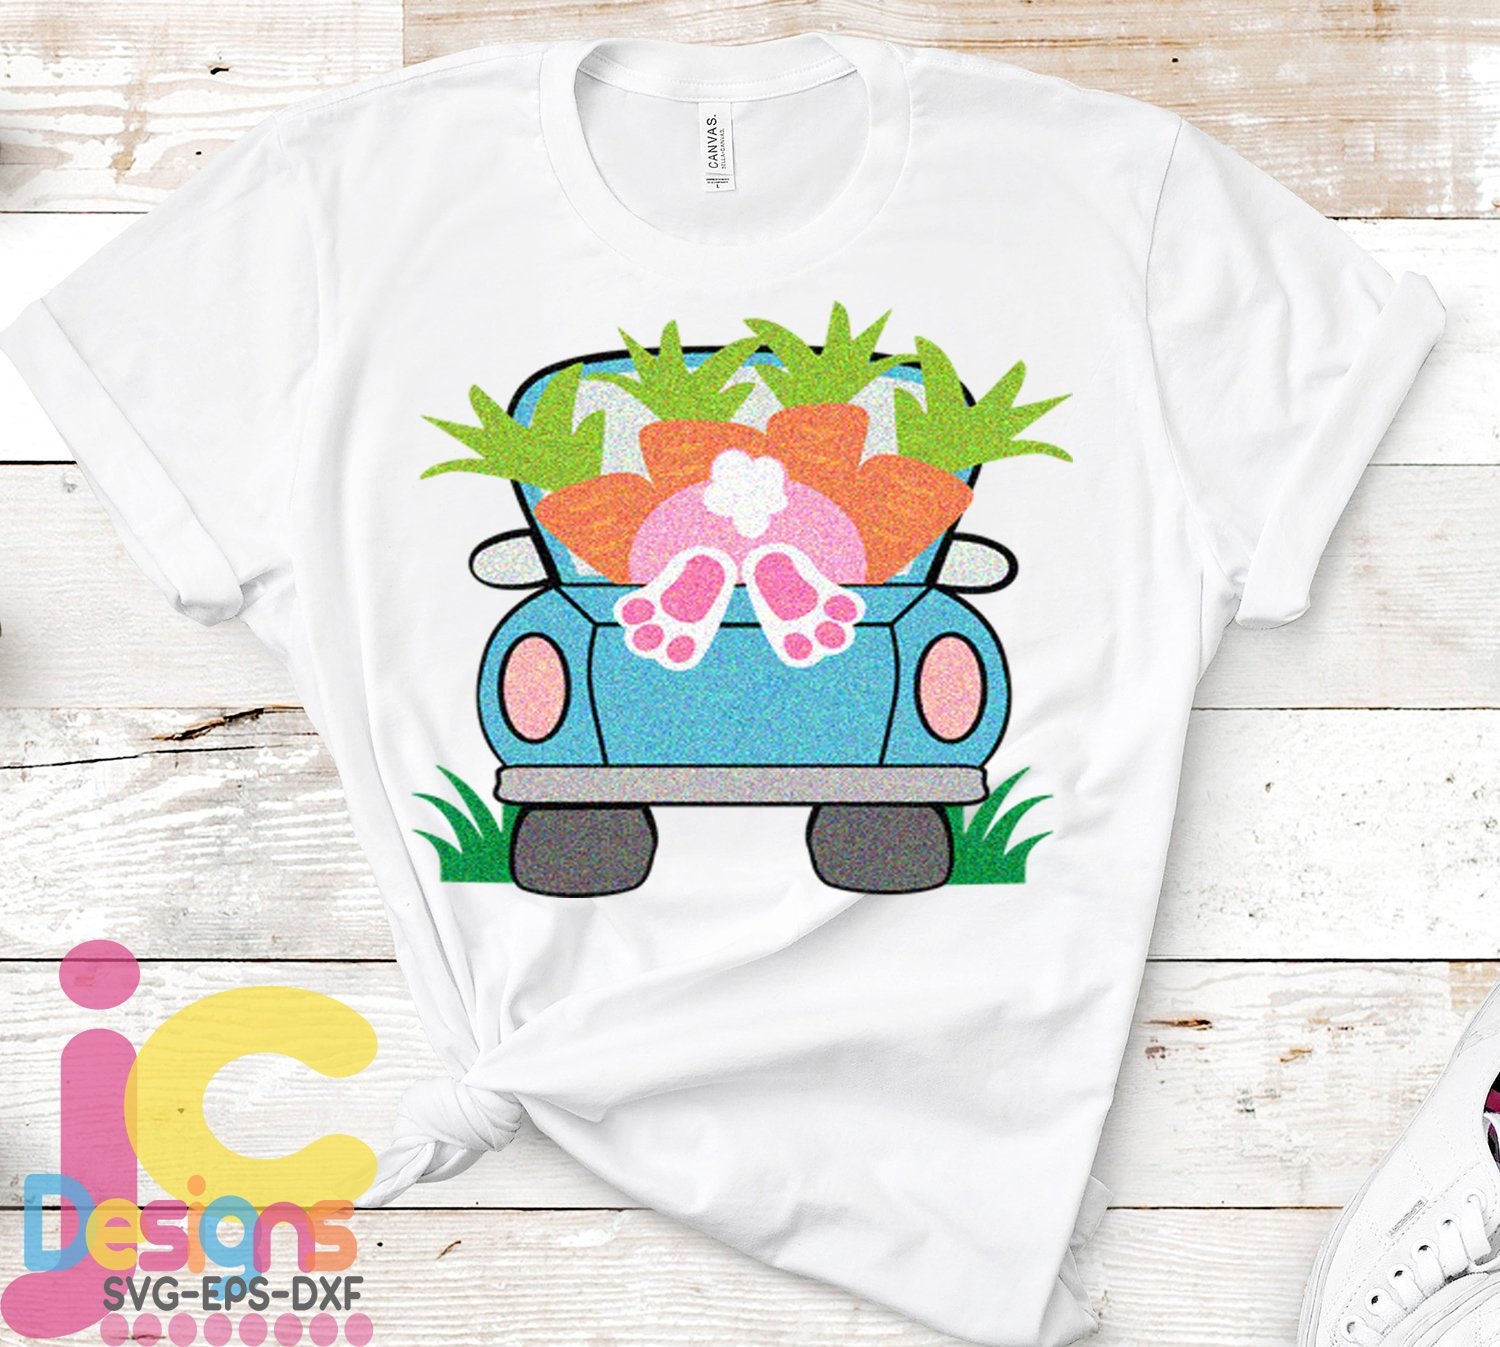 Easter svg, Easter bunny truck, Easter truck svg, Bunny in truck, bunny